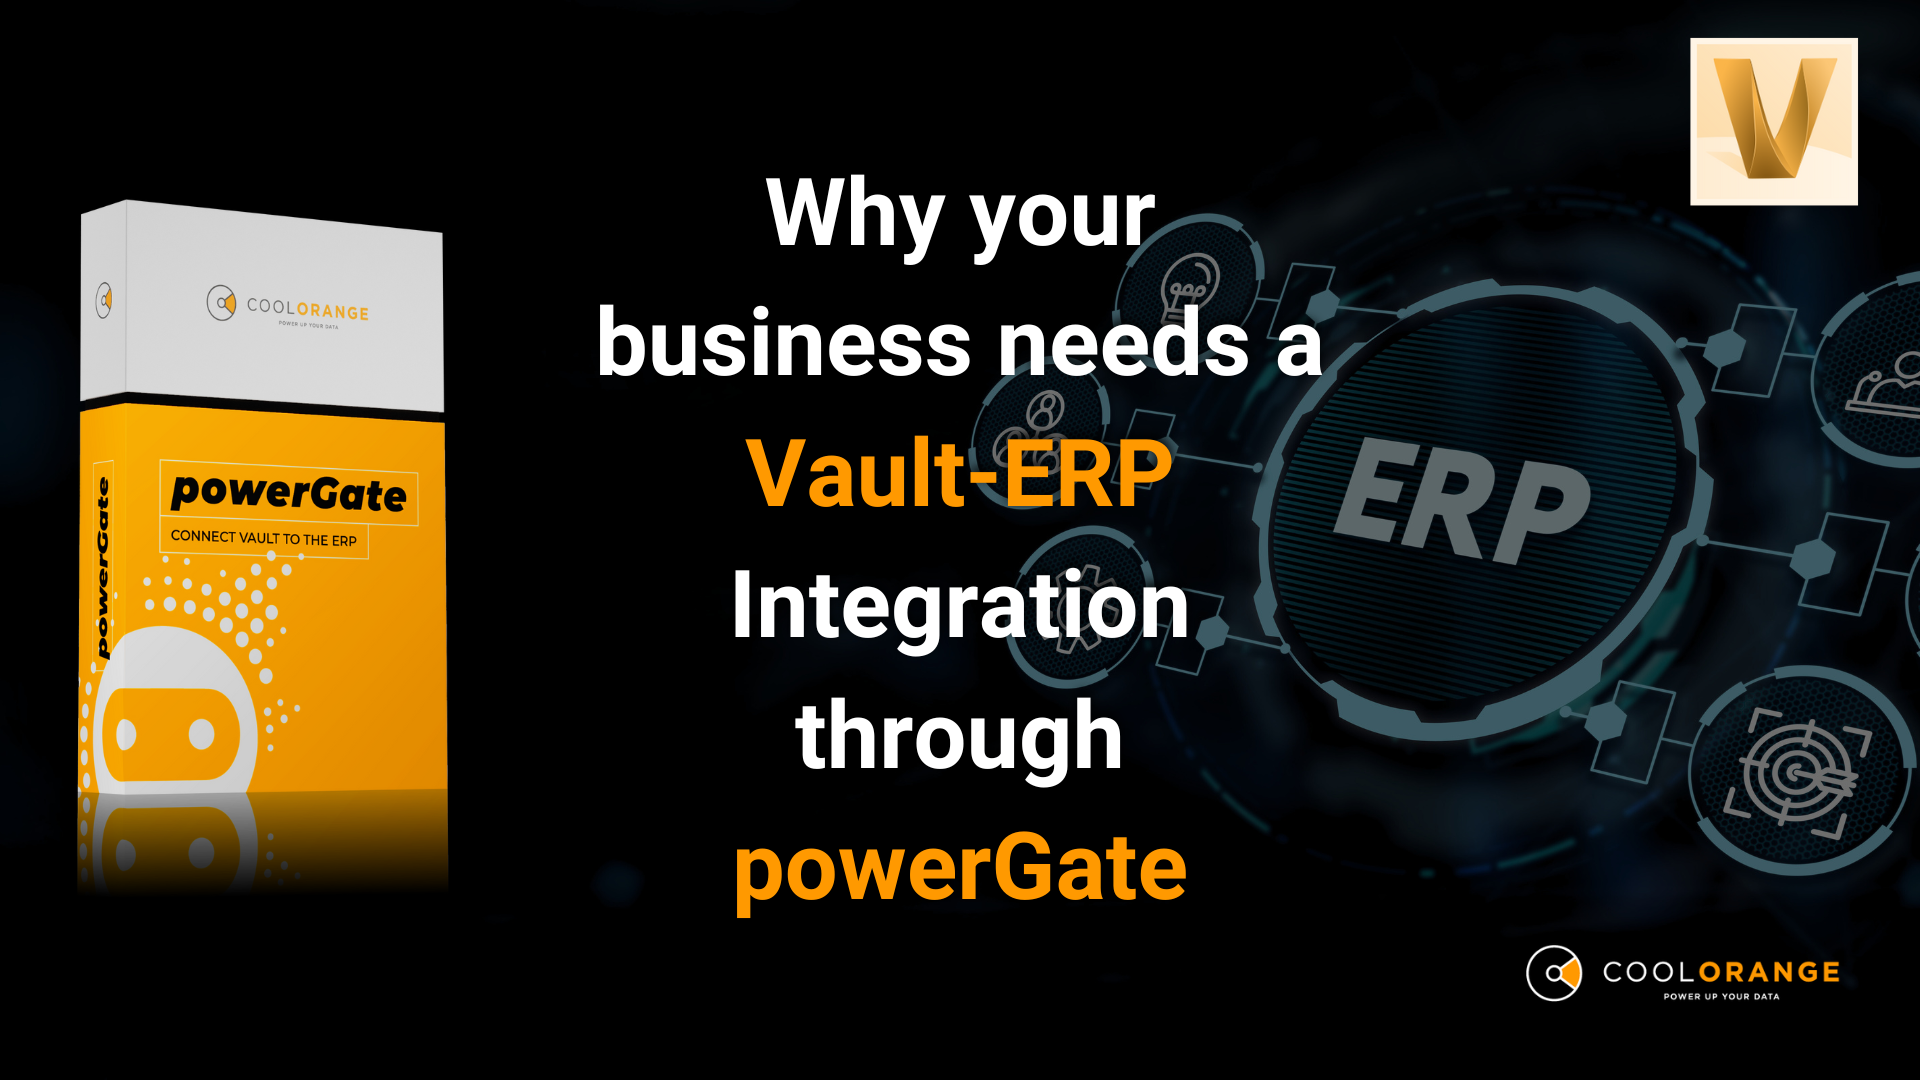 Why your business needs a dedicated Autodesk Vault - ERP integration through powerGate